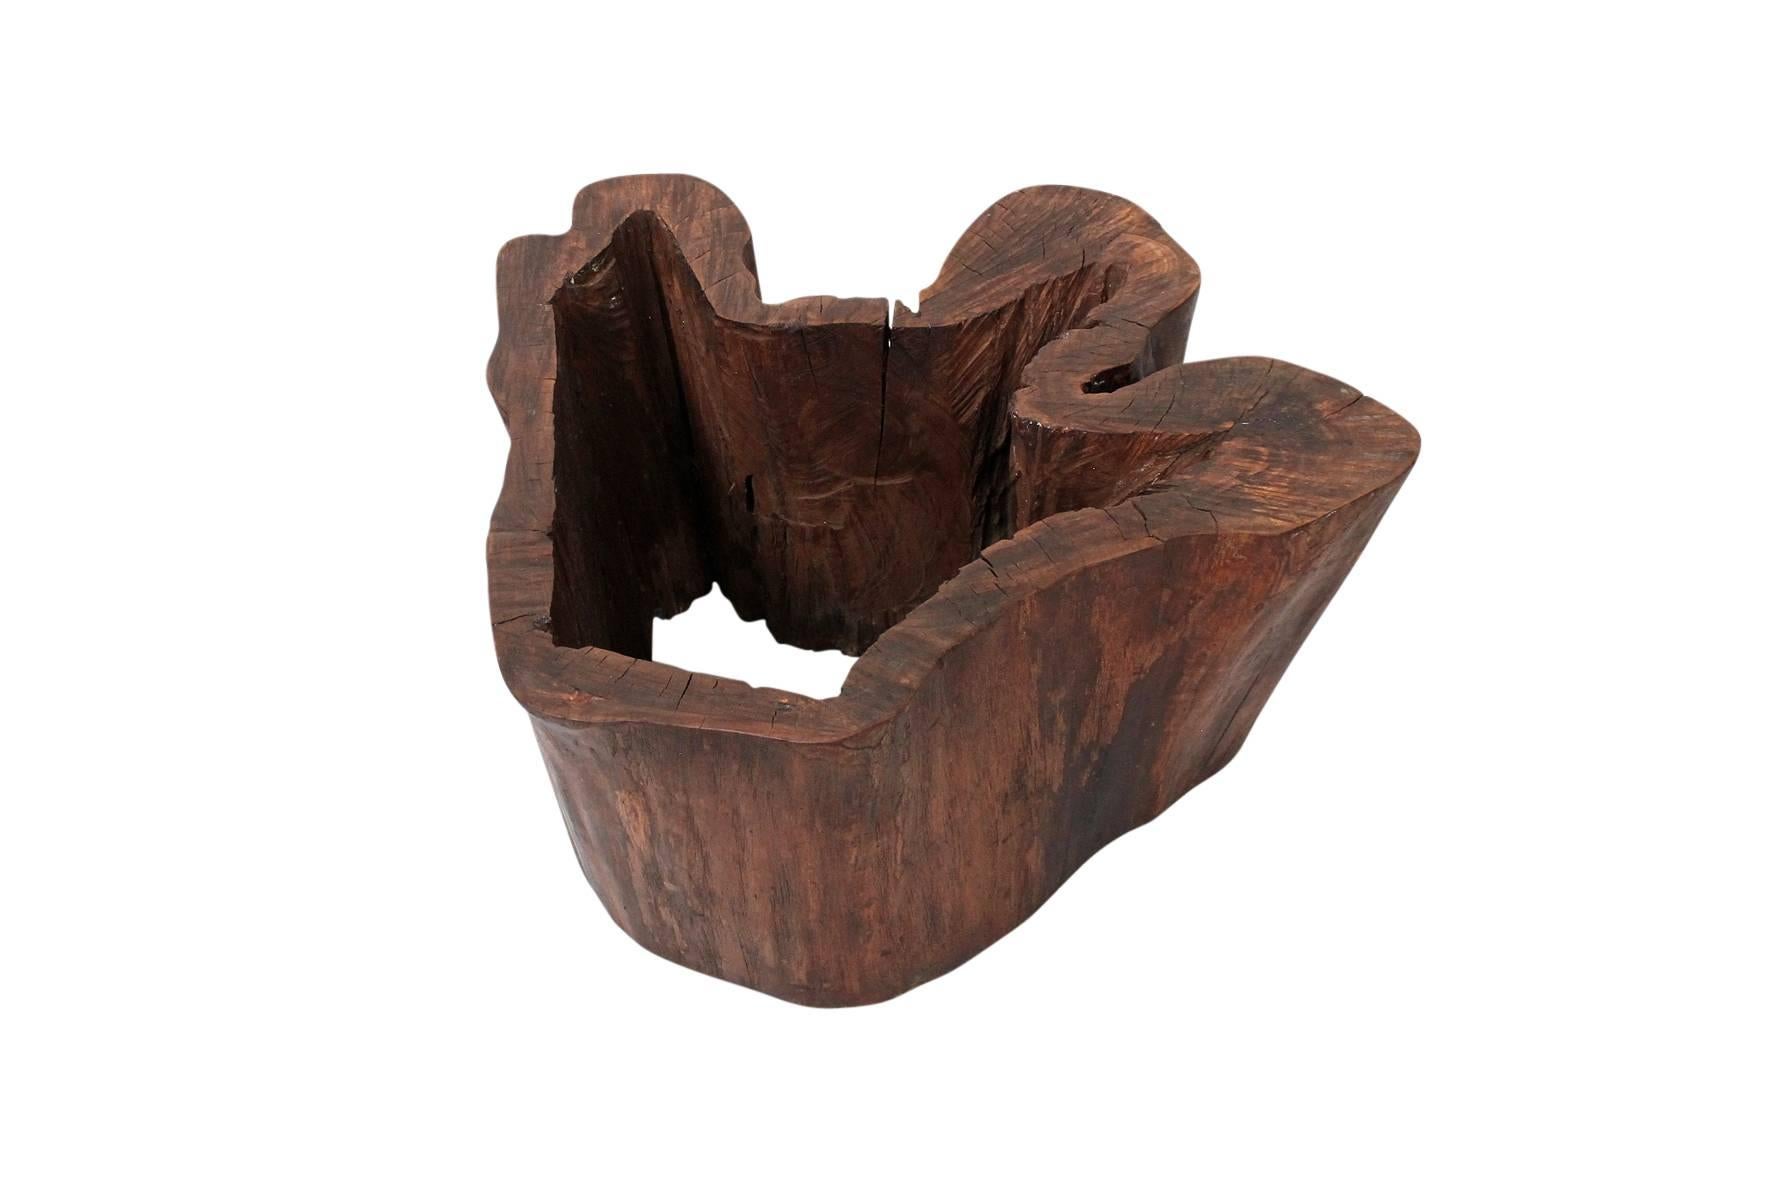 Brazilian Carved Hollow Stump Coffee Table